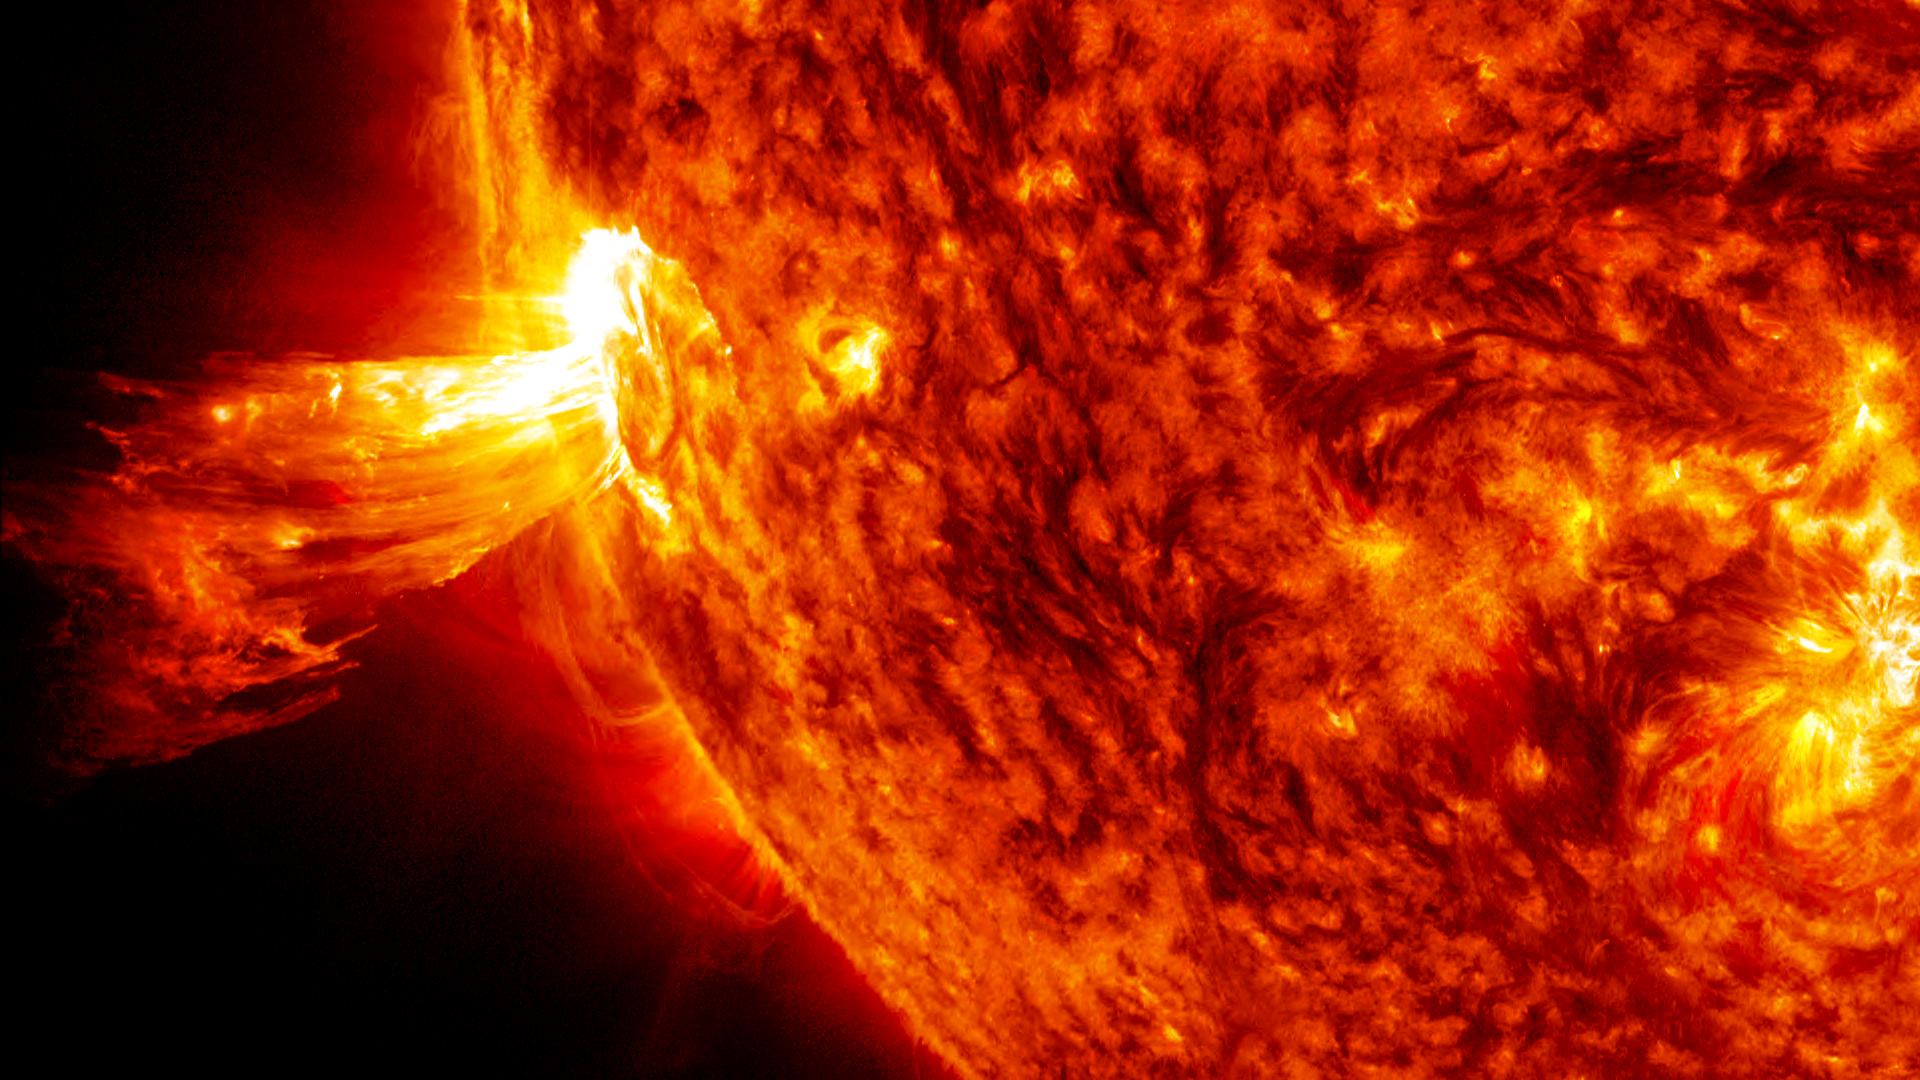 Video of prominence eruption showing a blend of 304 and 171 angstrom light imaged by the Solar Dynamics Observatory's AIA instrument.Credit: NASA's Goddard Space Flight Center/SDO